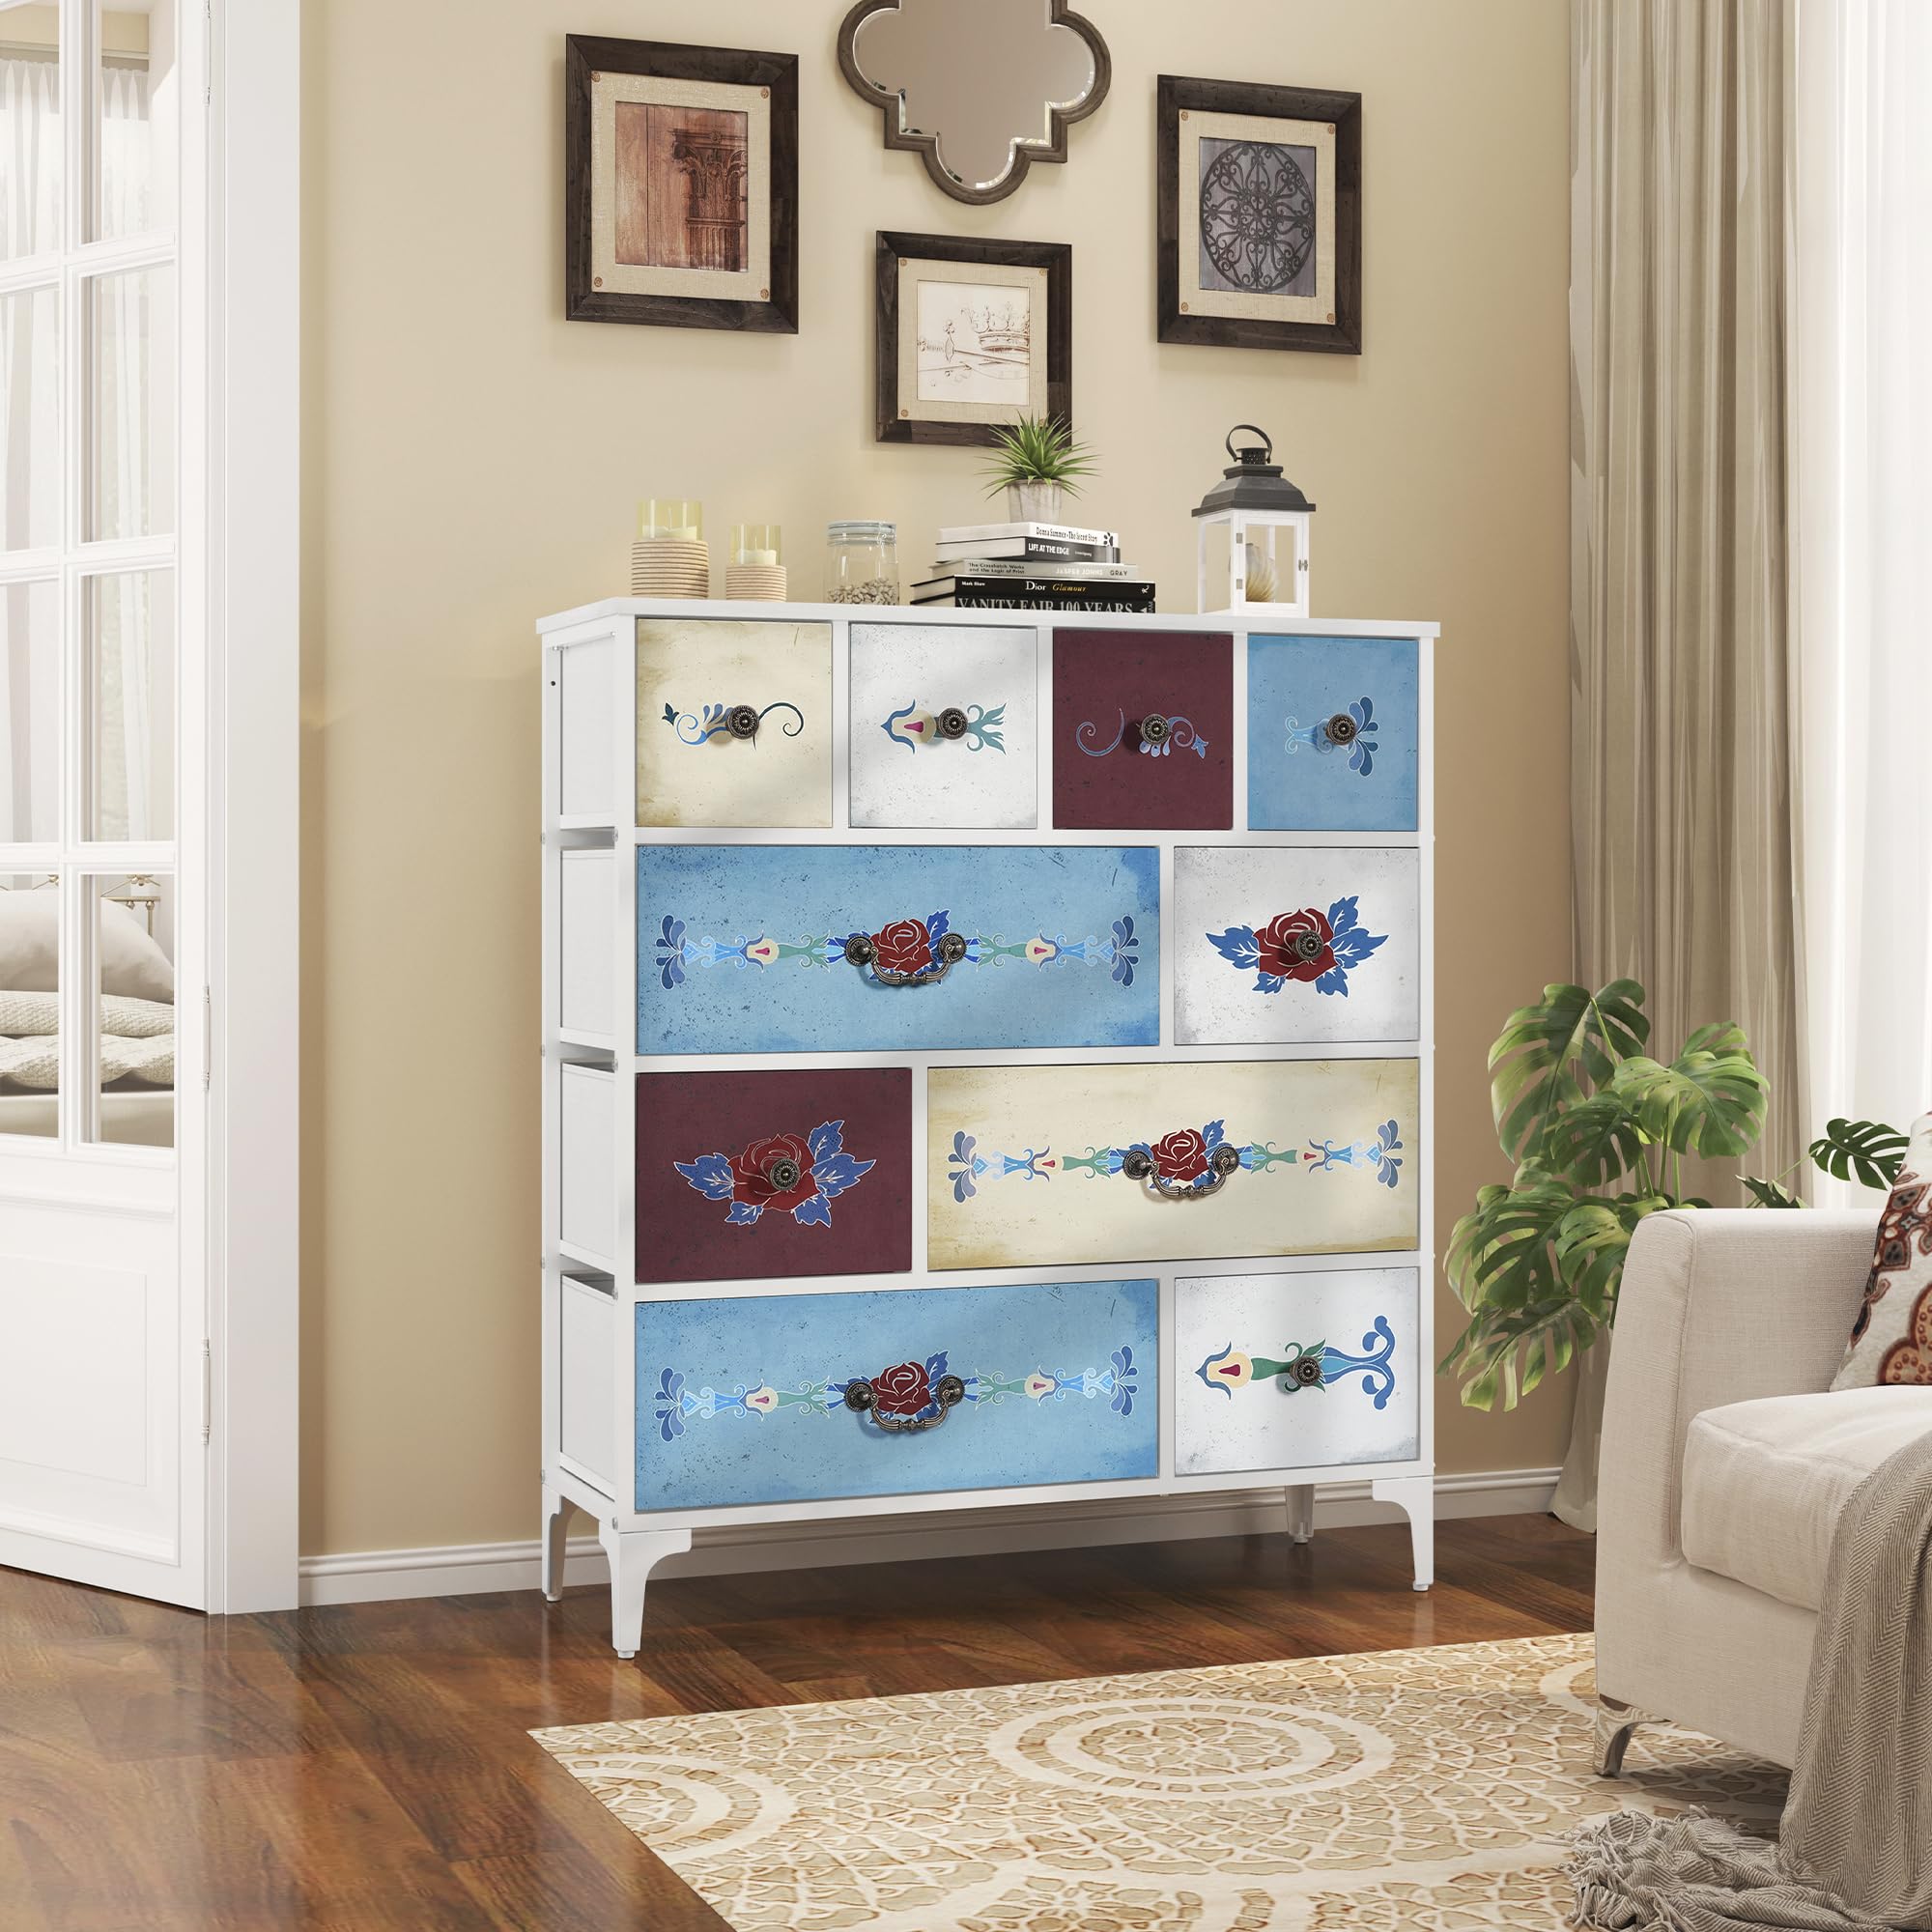 LYNCOHOME Boho Dresser for Bedoroom, Tall Dresser with 10 Drawers, White Chest of Drawers, Dresser Organizer for Closet, Entryway, Living Room, Nursery Room, Hallway